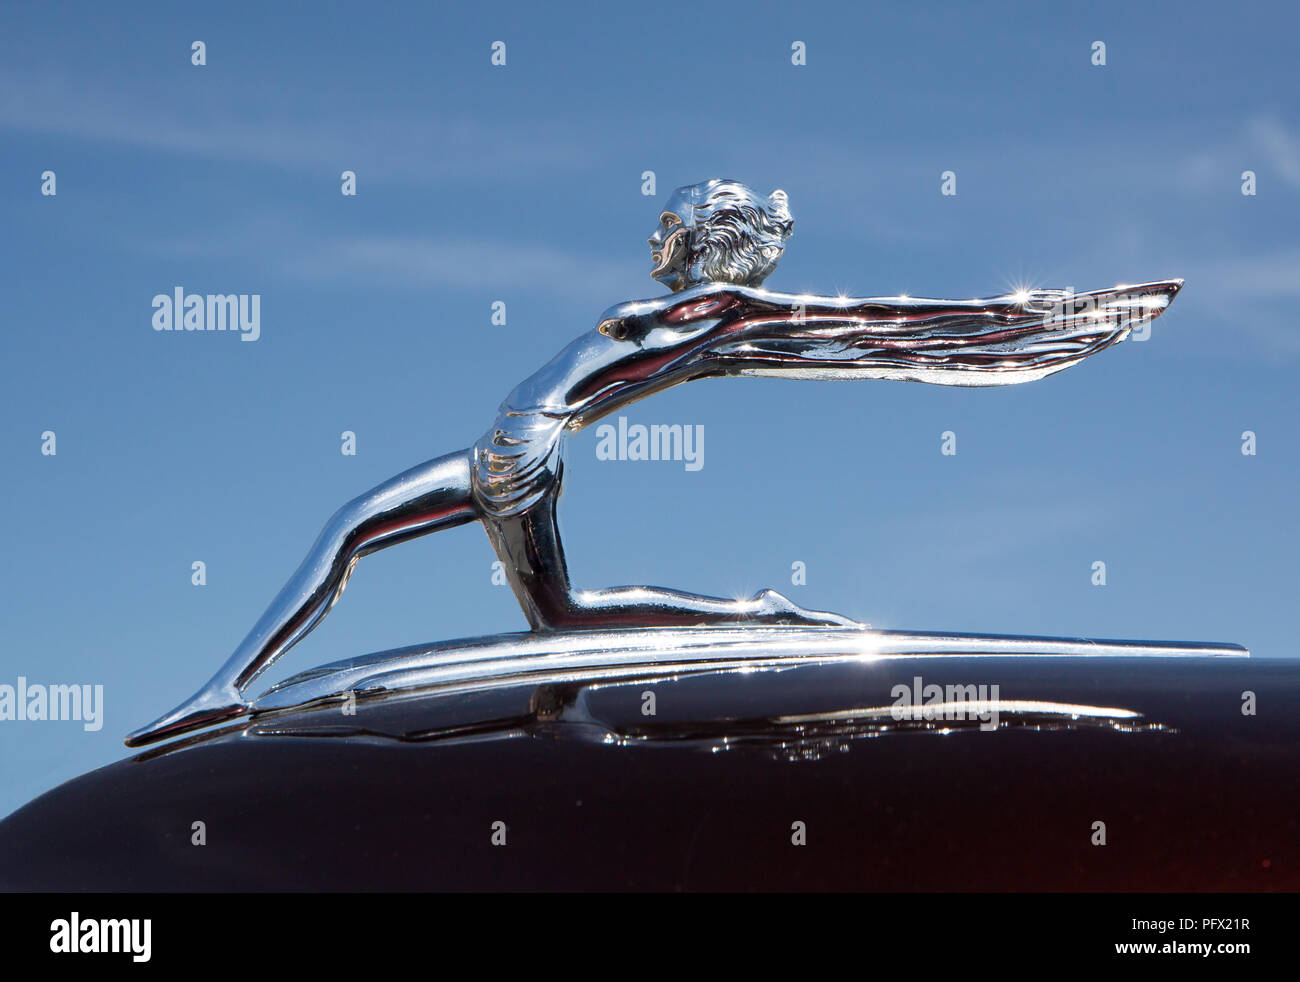 CONCORD, NC - April 5, 2018: Closeup of a 1934 Oldsmobile hood ornament at the Pennzoil AutoFair Classic Car Show at Charlotte Motor Speedway. Stock Photo